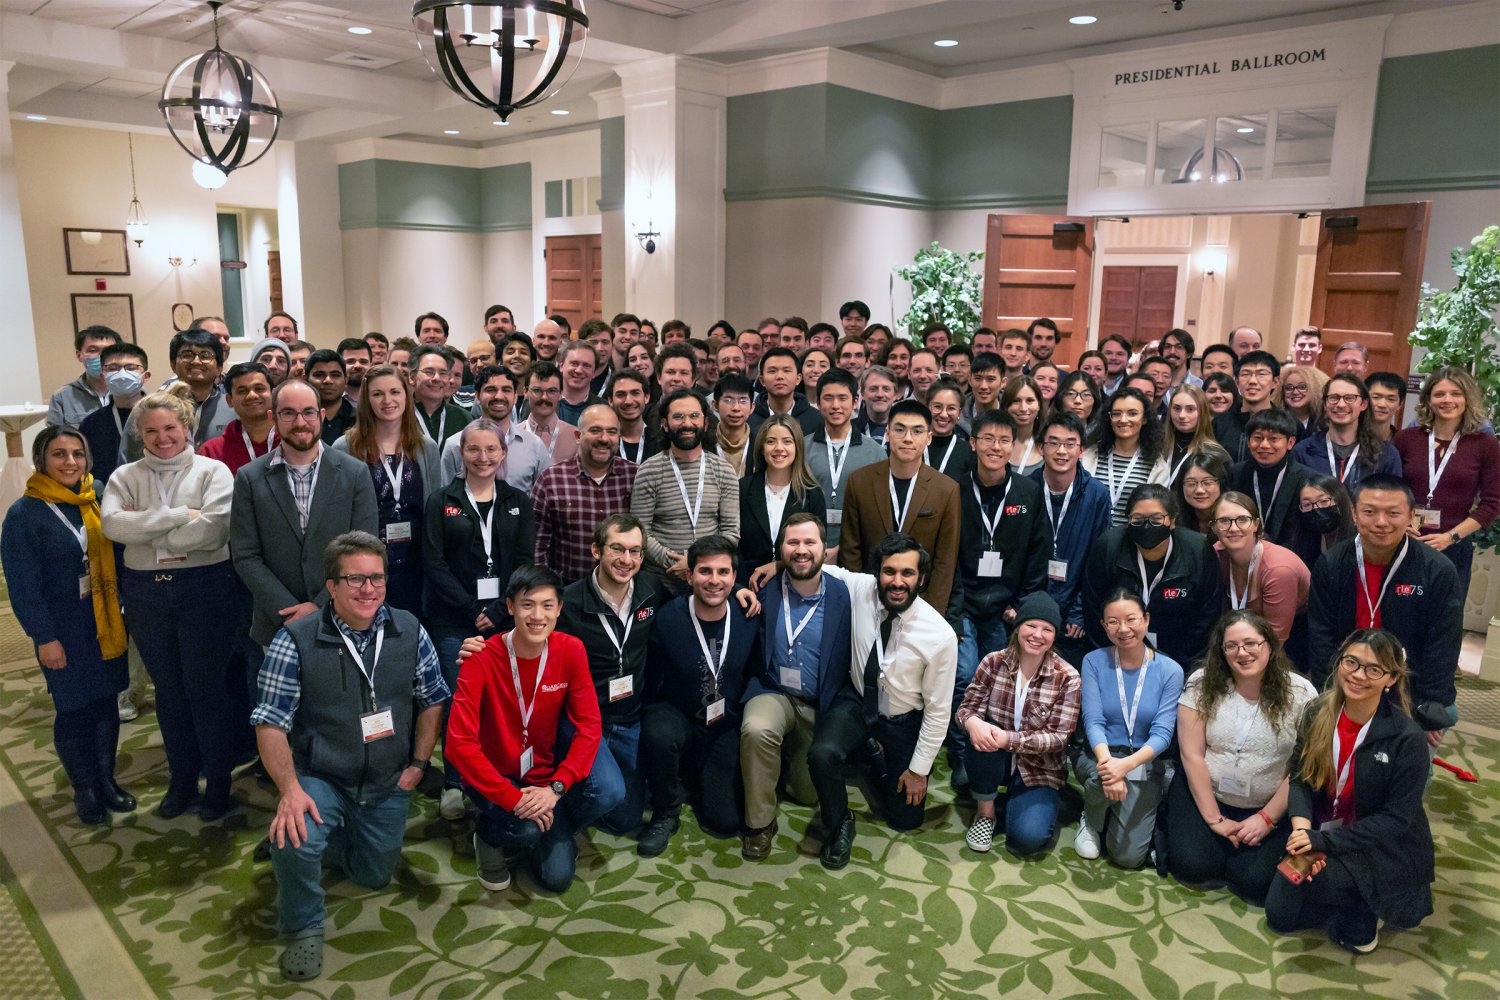 Attendees of the 2023 QSEC Annual Research Conference (QuARC) praised the sense of community that arose from organizing the event in-person for the first time. Held off-campus in New Hampshire, QuARC brought together more than 110 MIT student and postdoctoral researchers, staff, faculty, and industry partners.